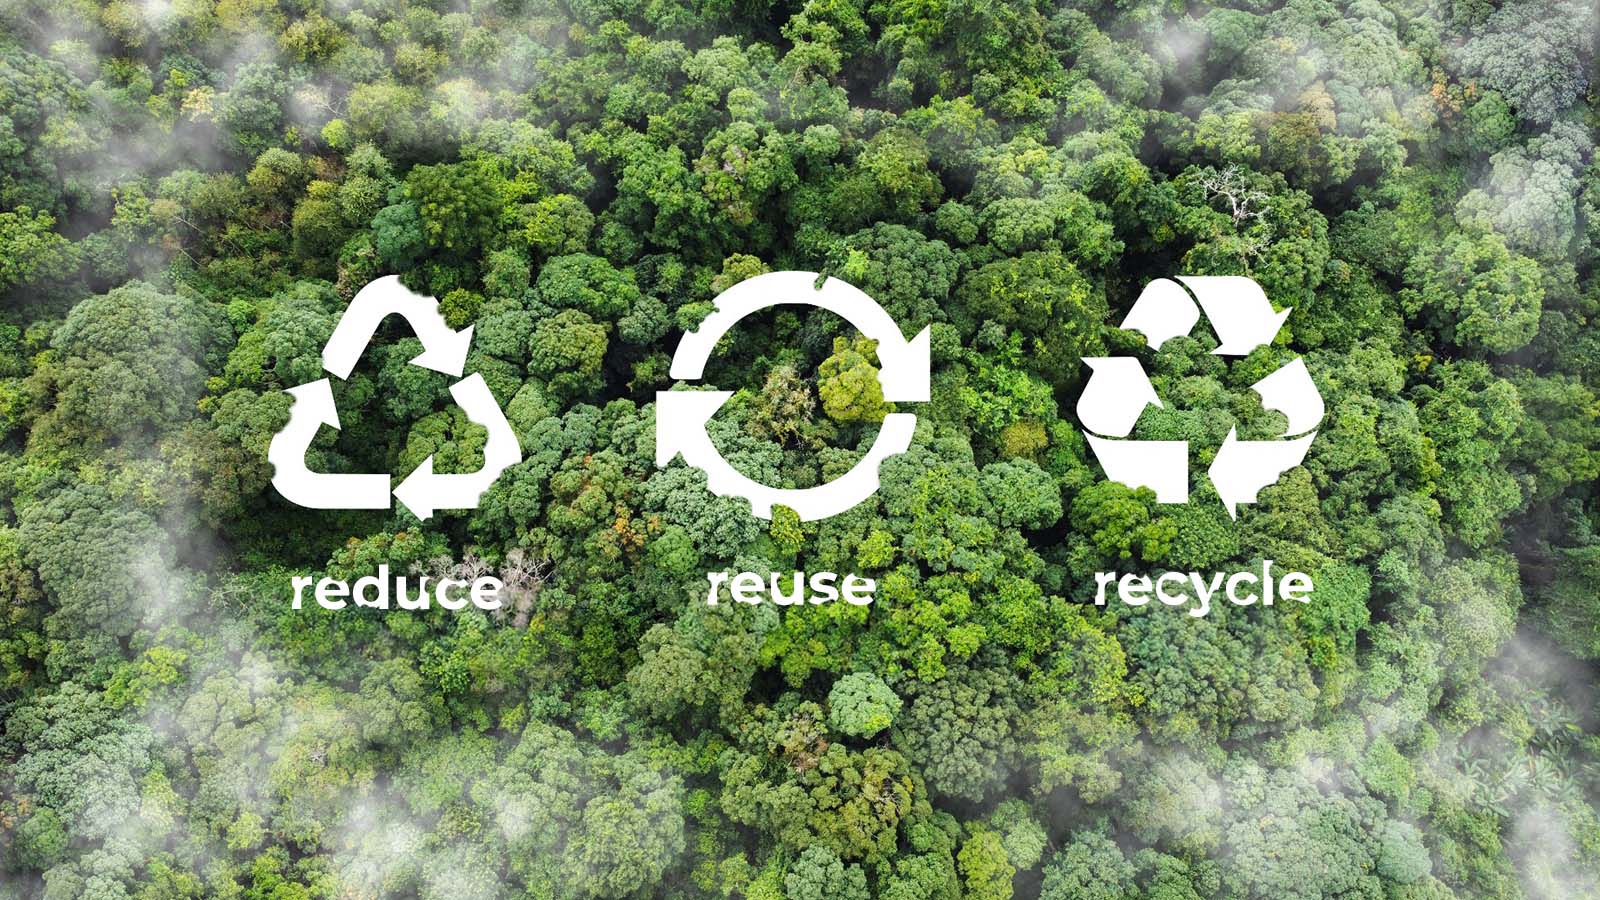 Reduce, reuse, recycle icons on top of green tree forest.